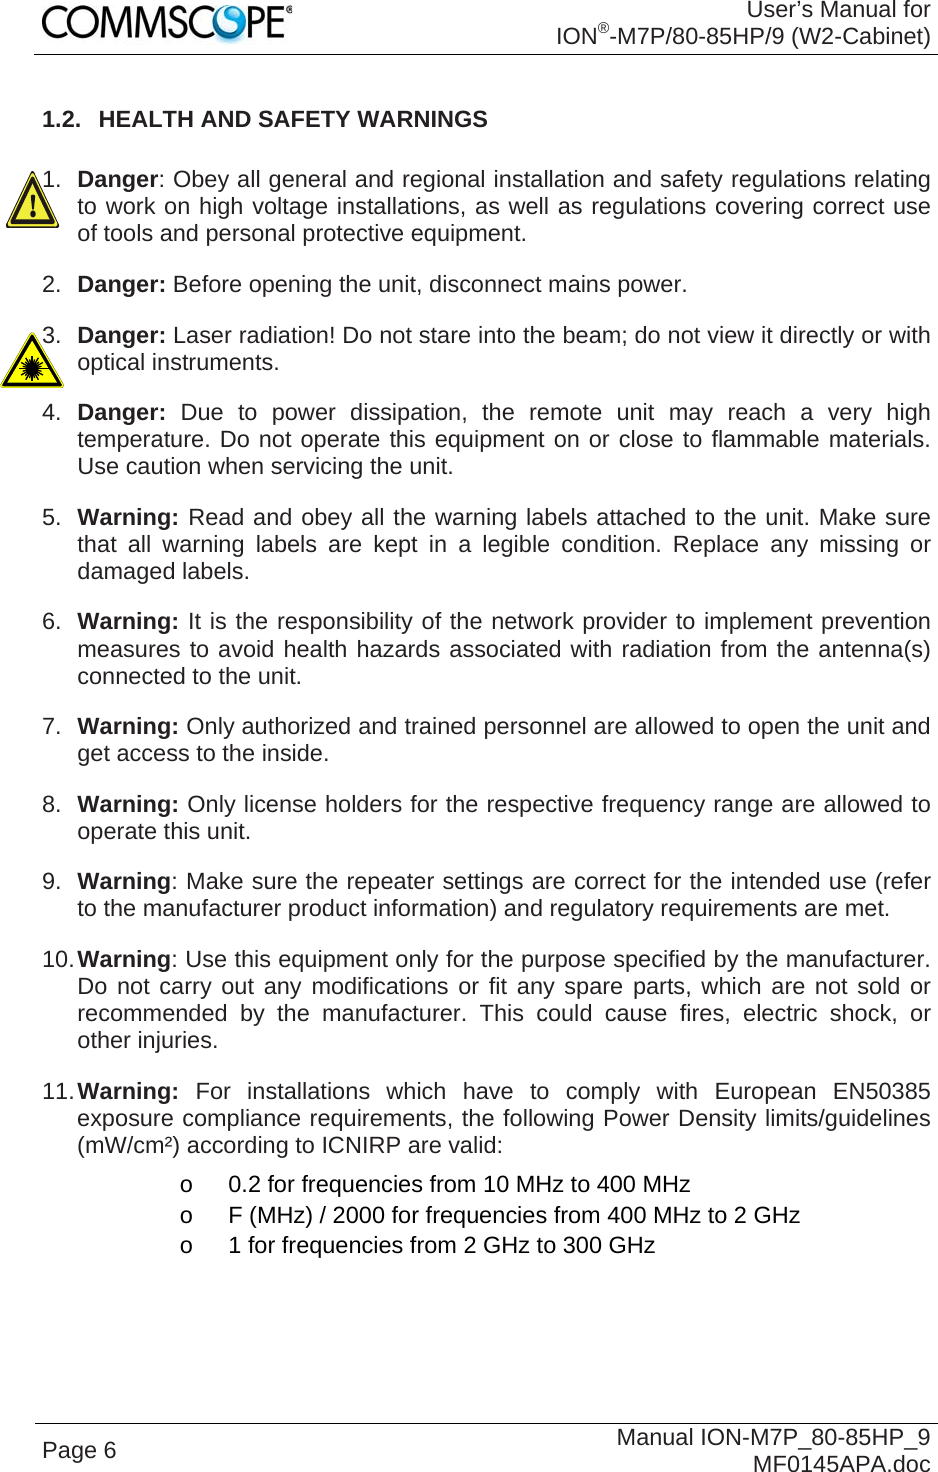 User’s Manual for ION®-M7P/80-85HP/9 (W2-Cabinet) Page 6  Manual ION-M7P_80-85HP_9 MF0145APA.doc 1.2.  HEALTH AND SAFETY WARNINGS  1.  Danger: Obey all general and regional installation and safety regulations relating to work on high voltage installations, as well as regulations covering correct use of tools and personal protective equipment. 2.  Danger: Before opening the unit, disconnect mains power. 3.  Danger: Laser radiation! Do not stare into the beam; do not view it directly or with optical instruments. 4.  Danger:  Due to power dissipation, the remote unit may reach a very high temperature. Do not operate this equipment on or close to flammable materials. Use caution when servicing the unit. 5.  Warning: Read and obey all the warning labels attached to the unit. Make sure that all warning labels are kept in a legible condition. Replace any missing or damaged labels. 6.  Warning: It is the responsibility of the network provider to implement prevention measures to avoid health hazards associated with radiation from the antenna(s) connected to the unit. 7.  Warning: Only authorized and trained personnel are allowed to open the unit and get access to the inside. 8.  Warning: Only license holders for the respective frequency range are allowed to operate this unit. 9.  Warning: Make sure the repeater settings are correct for the intended use (refer to the manufacturer product information) and regulatory requirements are met. 10. Warning: Use this equipment only for the purpose specified by the manufacturer. Do not carry out any modifications or fit any spare parts, which are not sold or recommended by the manufacturer. This could cause fires, electric shock, or other injuries. 11. Warning: For installations which have to comply with European EN50385 exposure compliance requirements, the following Power Density limits/guidelines (mW/cm²) according to ICNIRP are valid: o  0.2 for frequencies from 10 MHz to 400 MHz o  F (MHz) / 2000 for frequencies from 400 MHz to 2 GHz o  1 for frequencies from 2 GHz to 300 GHz 